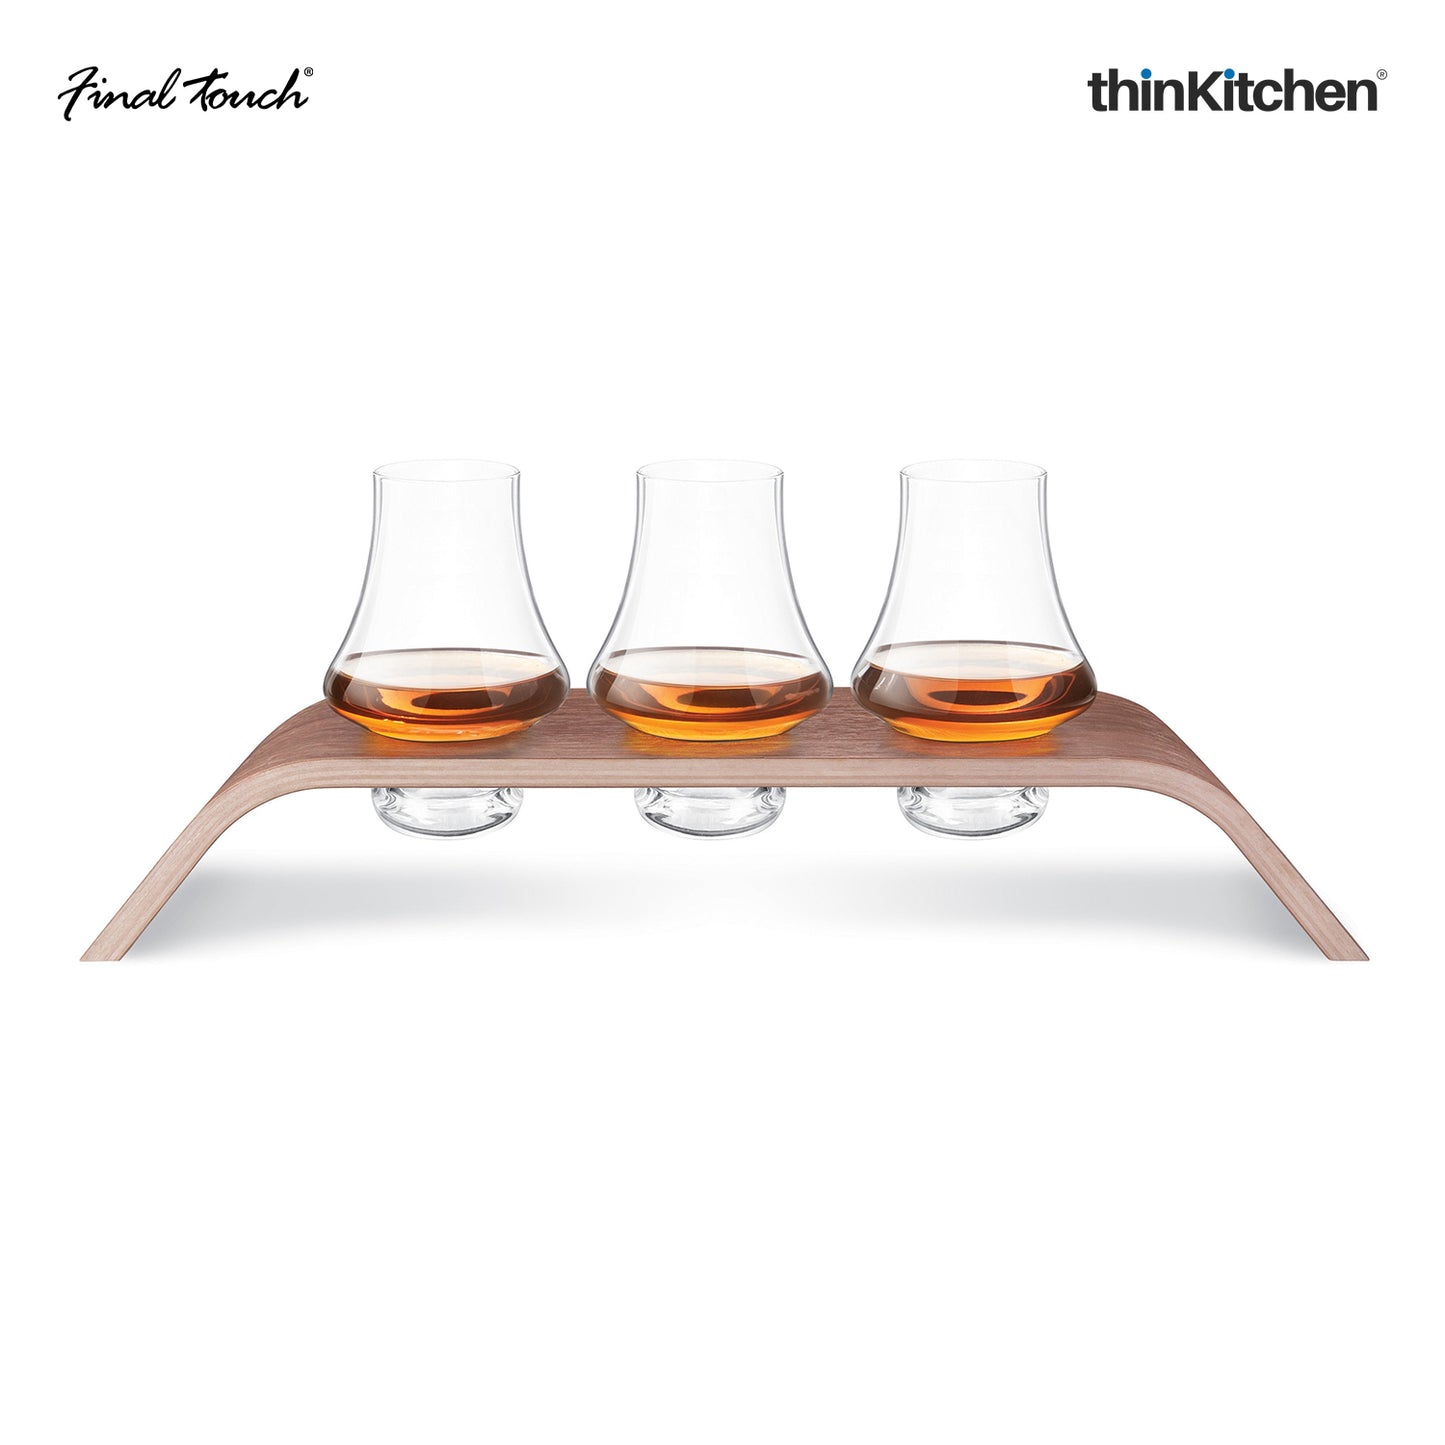 Final Touch Whiskey Flight Tasting Glass Set Of 4